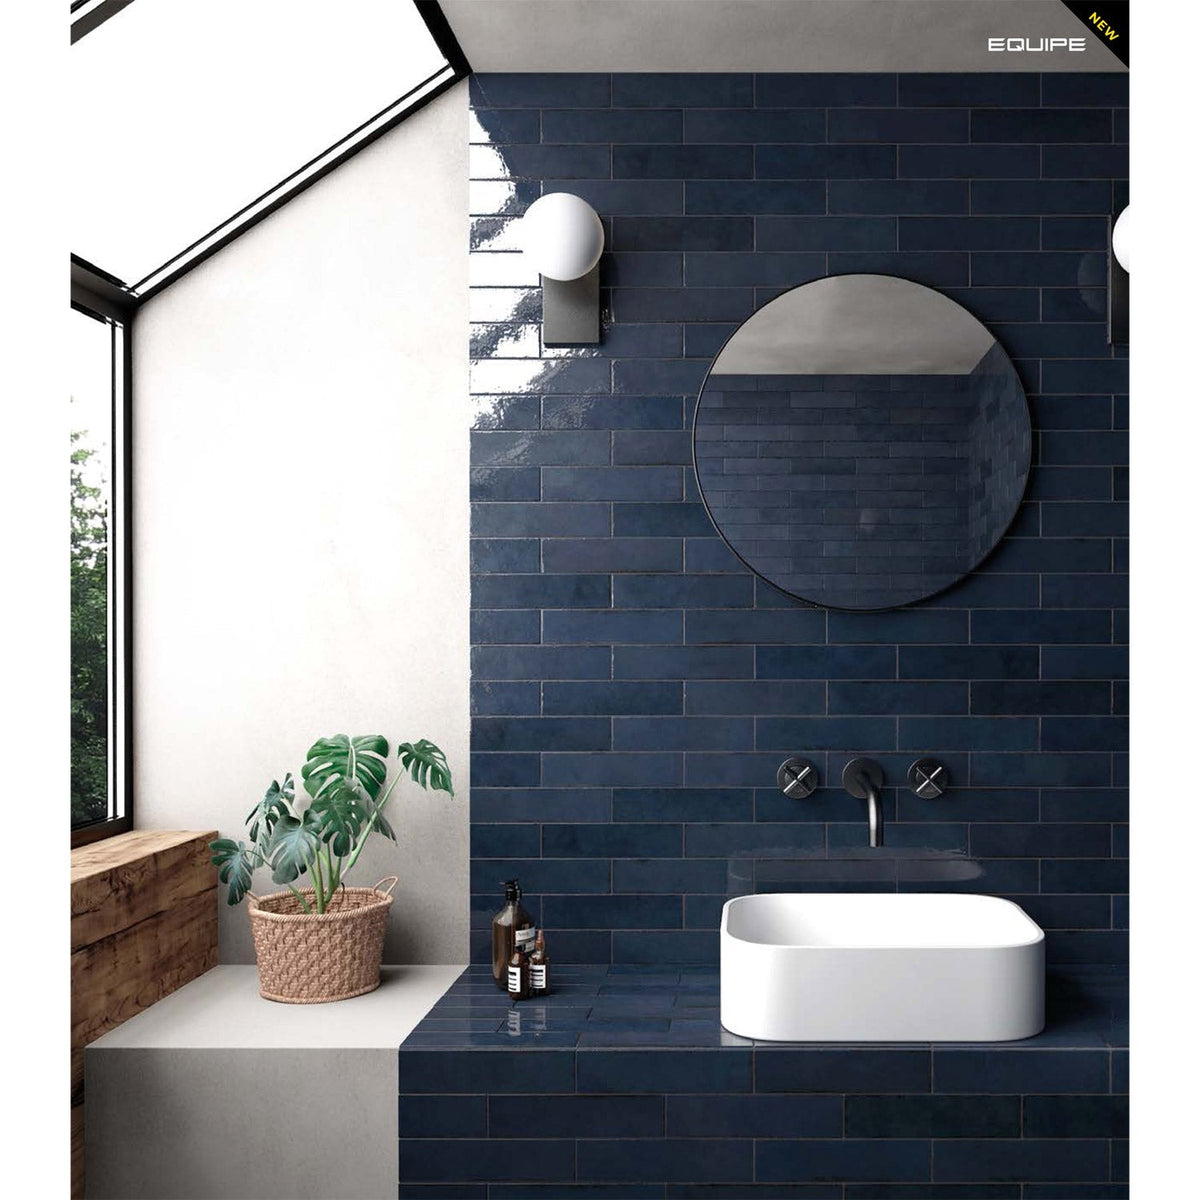 Equipe - Tribeca Collection - 2.5 in. x 10 in. Wall Tile - Blue Note Installed